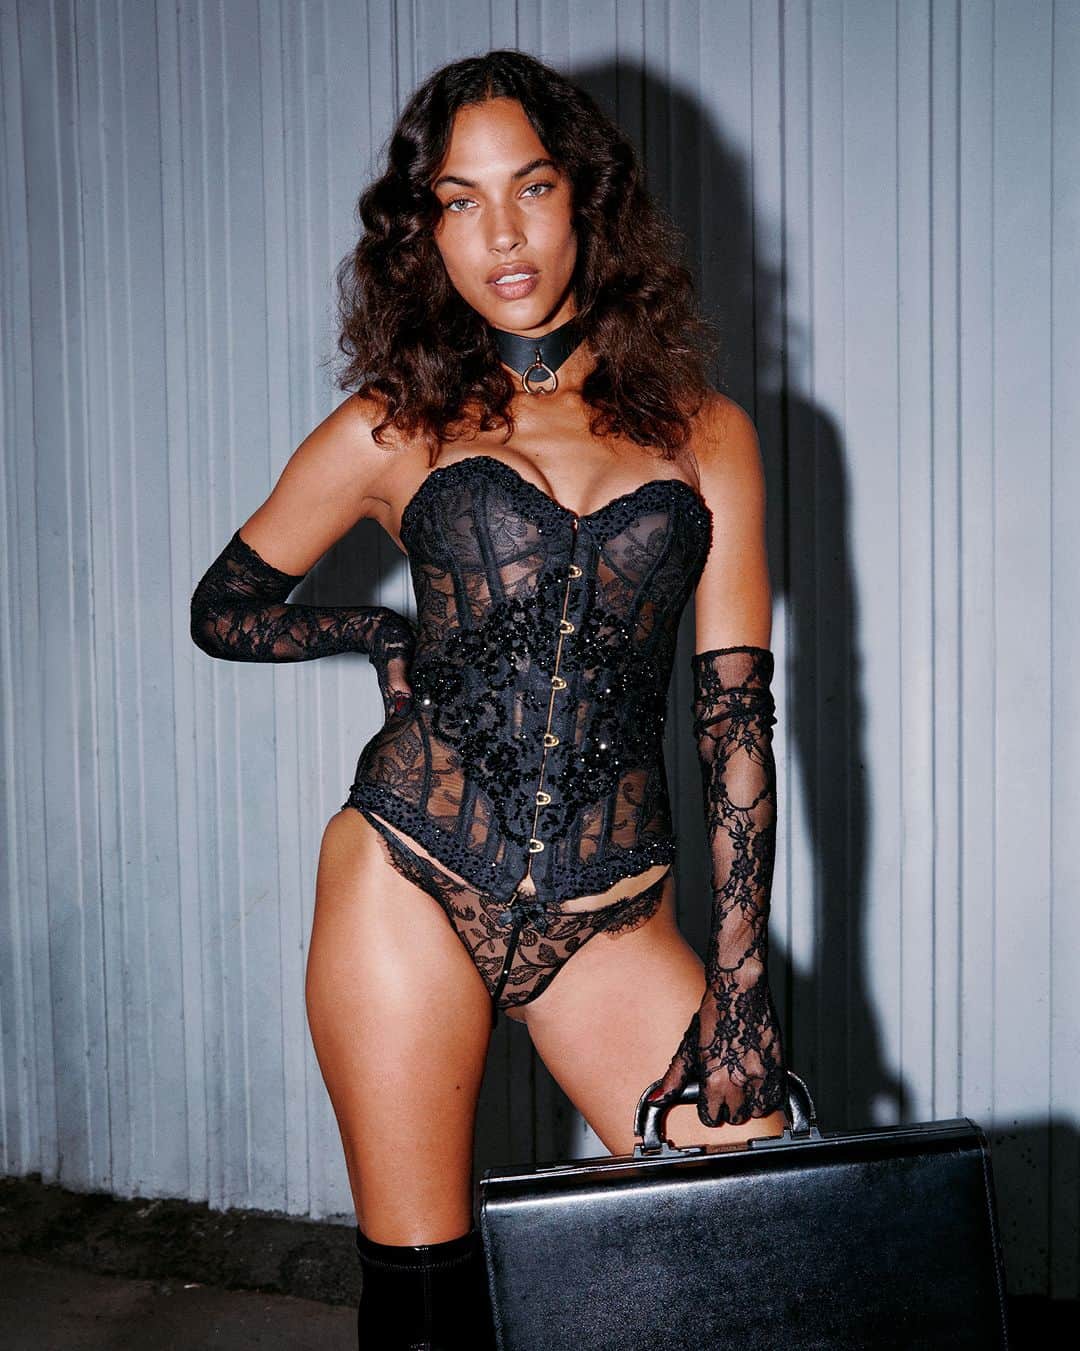 Agent Provocateurのインスタグラム：「The Case For Provocation 🖤  #TheHotPursuit continues - new femme fatale corset Krystabell is now available.  Get ready to dazzle. ✨ Krystabell mixes Austrian embroidery, French Leavers lace, and Swarovski crystals to devastatingly glamourous effect.  Tap to explore Krystabell.  #TheHotPursuit #KnickersForever #AgentProvocateur」